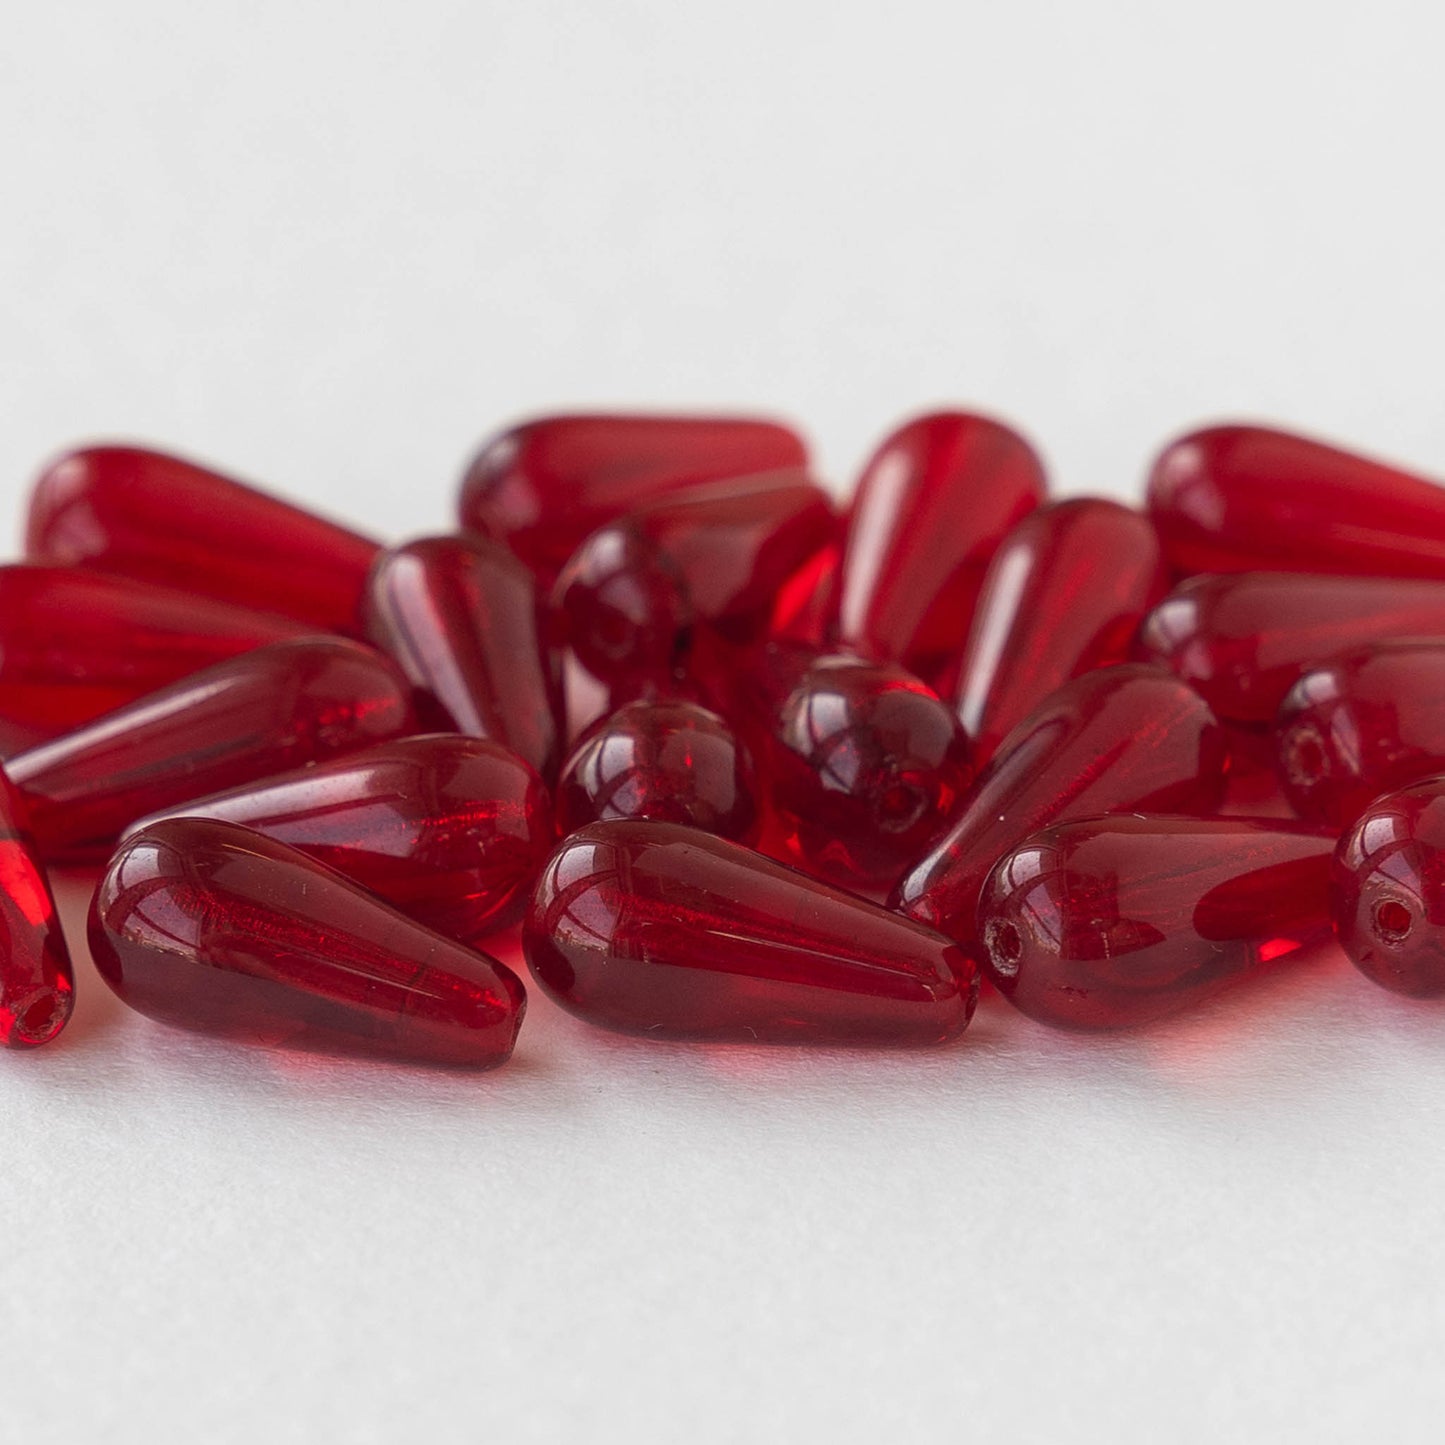 Load image into Gallery viewer, 6x12mm Long Drilled Drops - Ruby Red - 20 Beads
